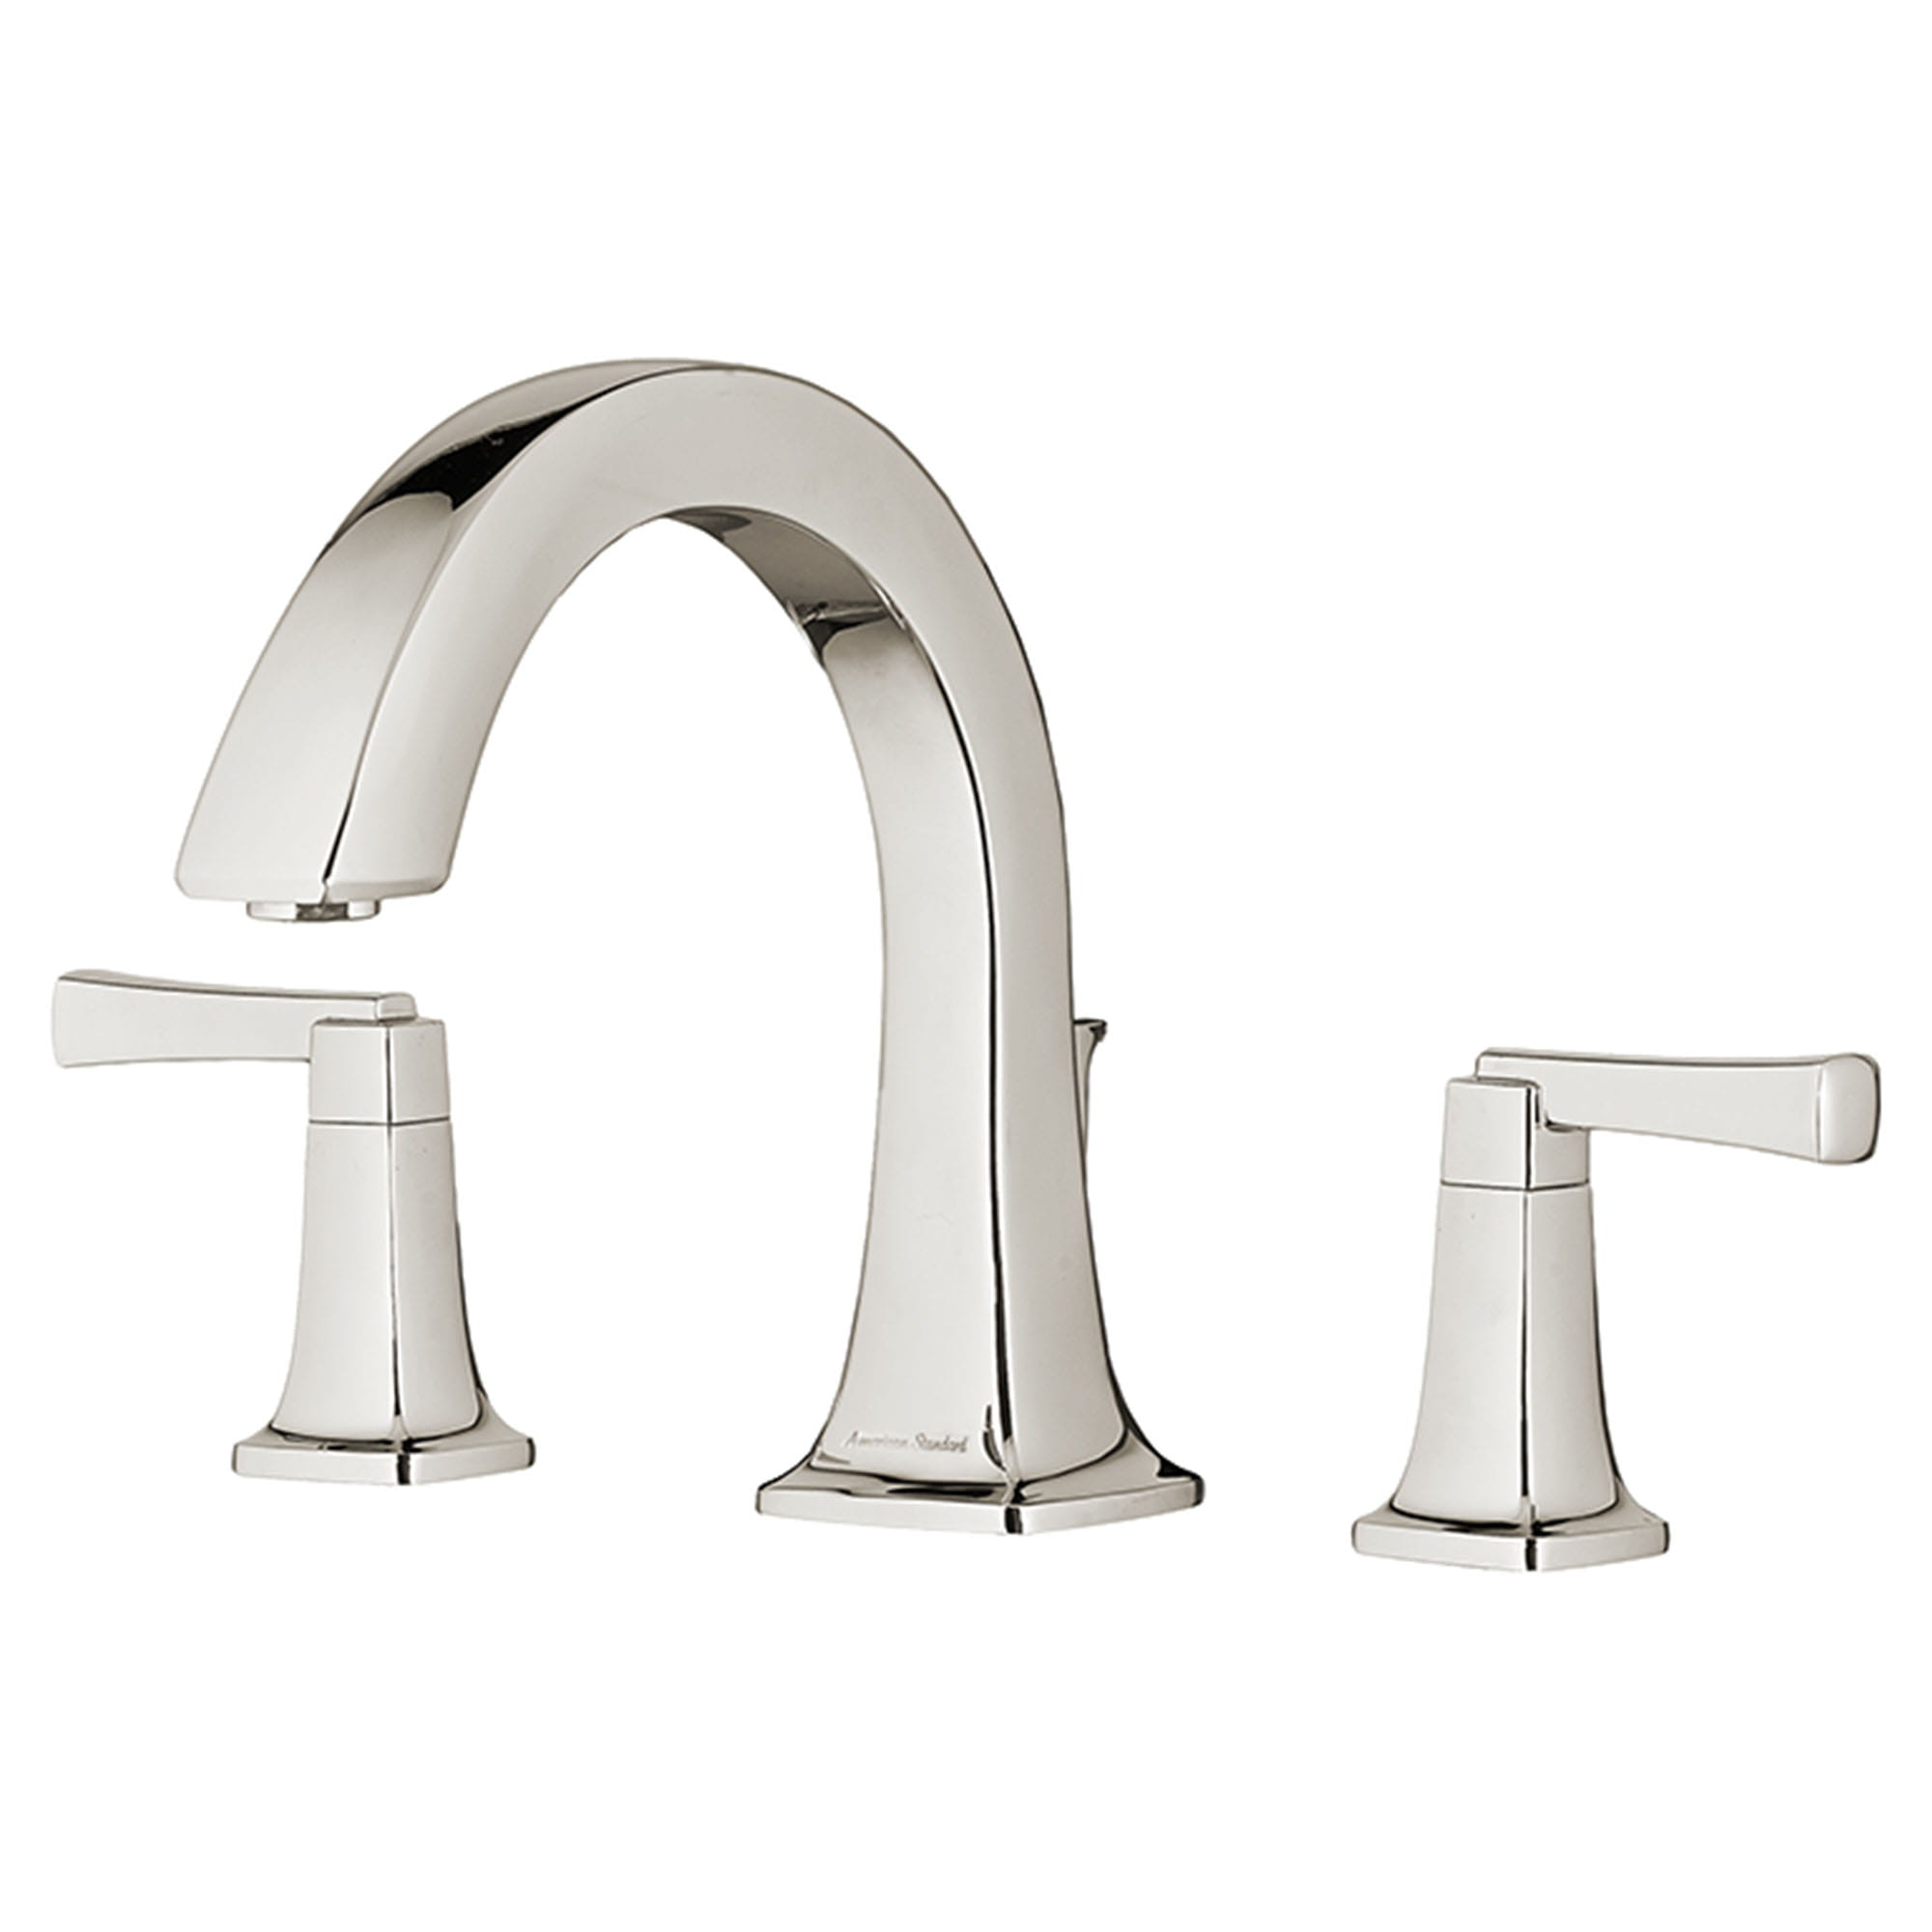 Townsend Bathtub Faucet With Lever Handles for Flash Rough In Valve POLISHED  NICKEL